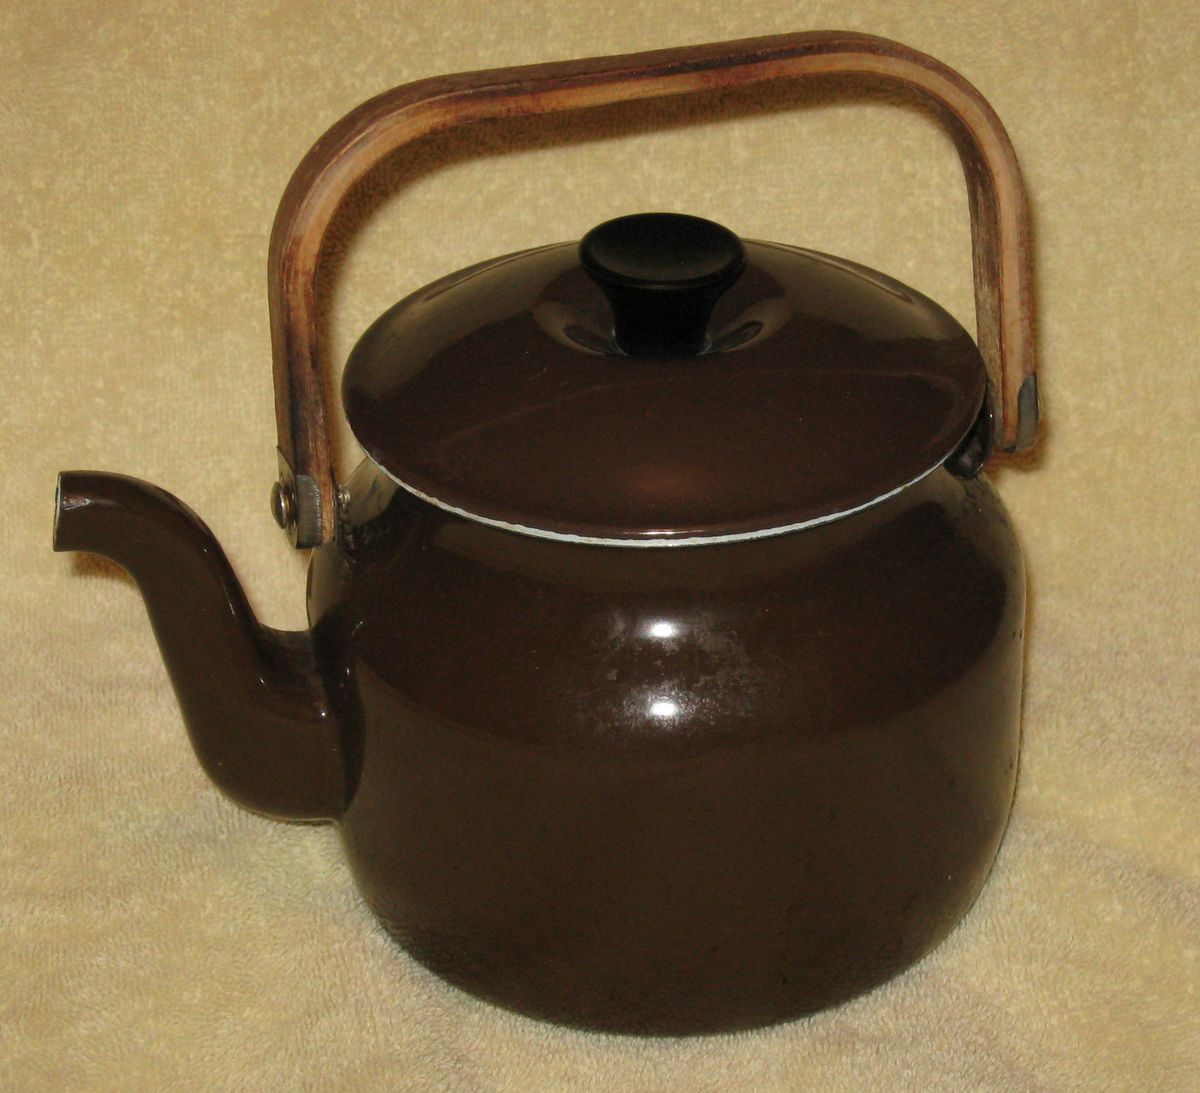 Le Creuset tea pot kettle with hinged wooden handle   brown enamel on